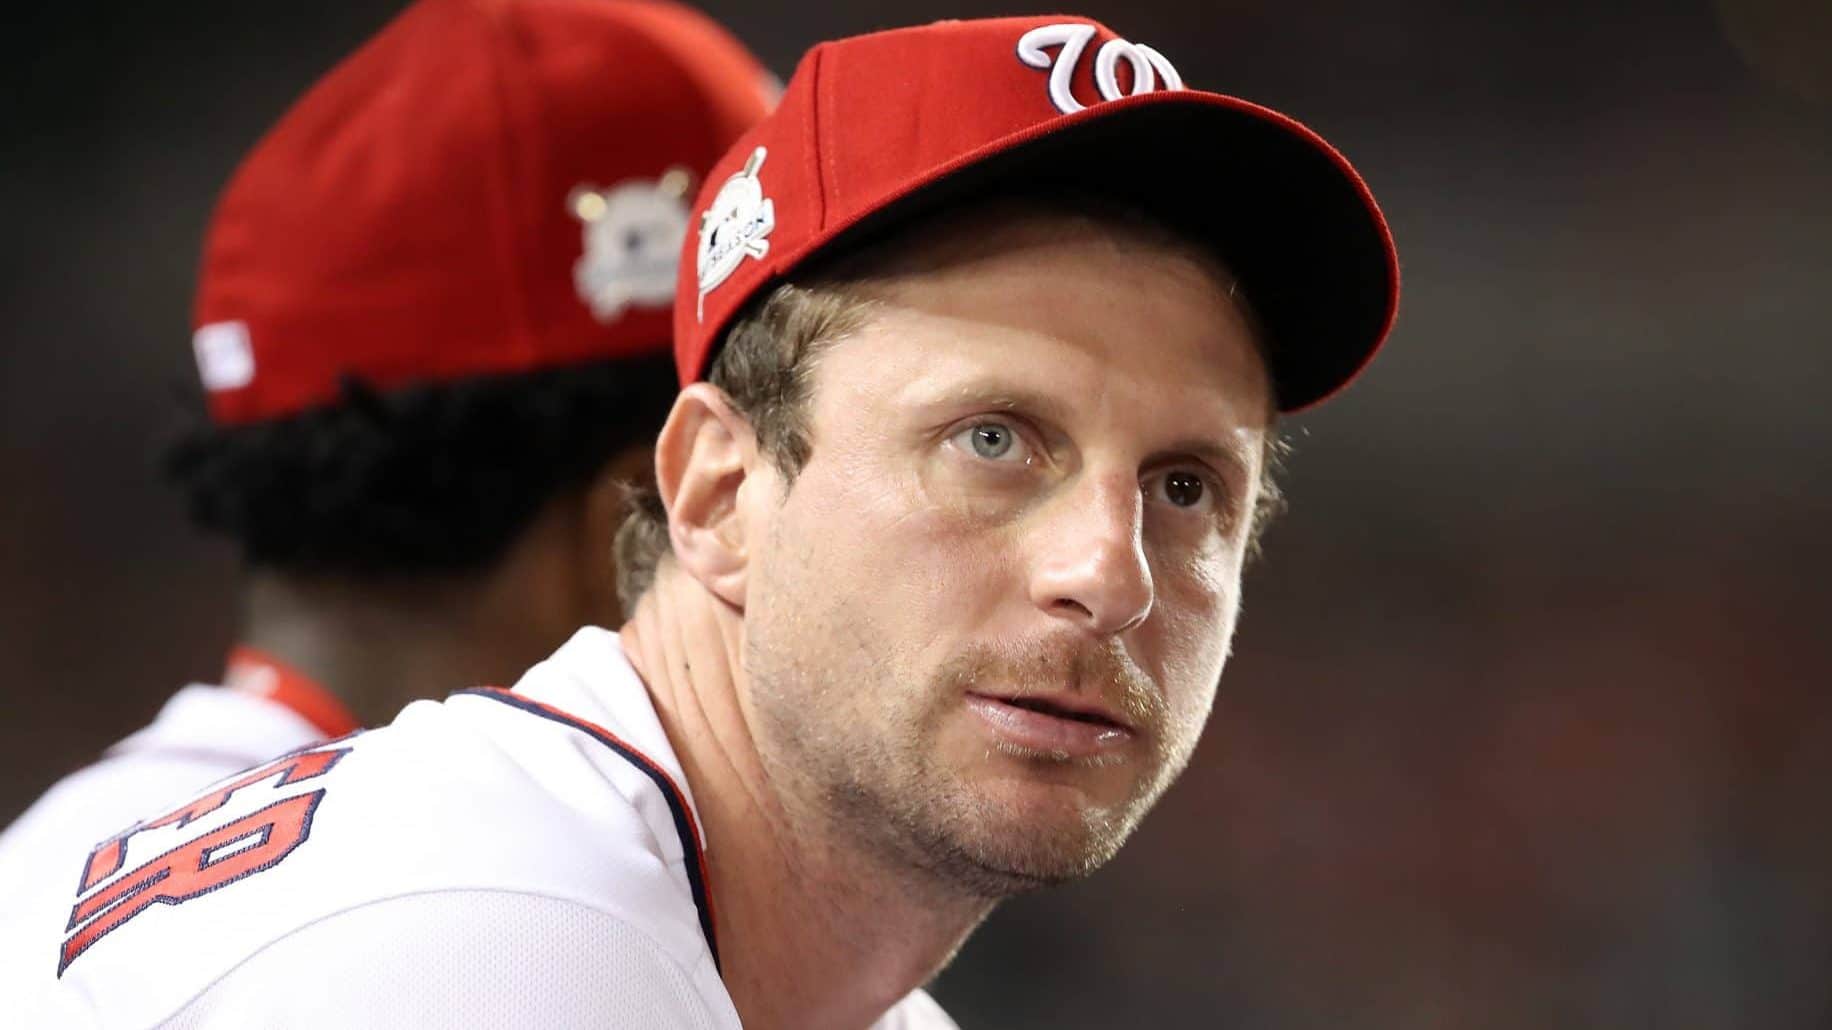 WASHINGTON, DC - OCTOBER 06: Max Scherzer #31 of the Washington Nationals looks on from the dugout in the 4th inning during game one of the National League Division Series against the Chicago Cubs at Nationals Park on October 6, 2017 in Washington, DC.